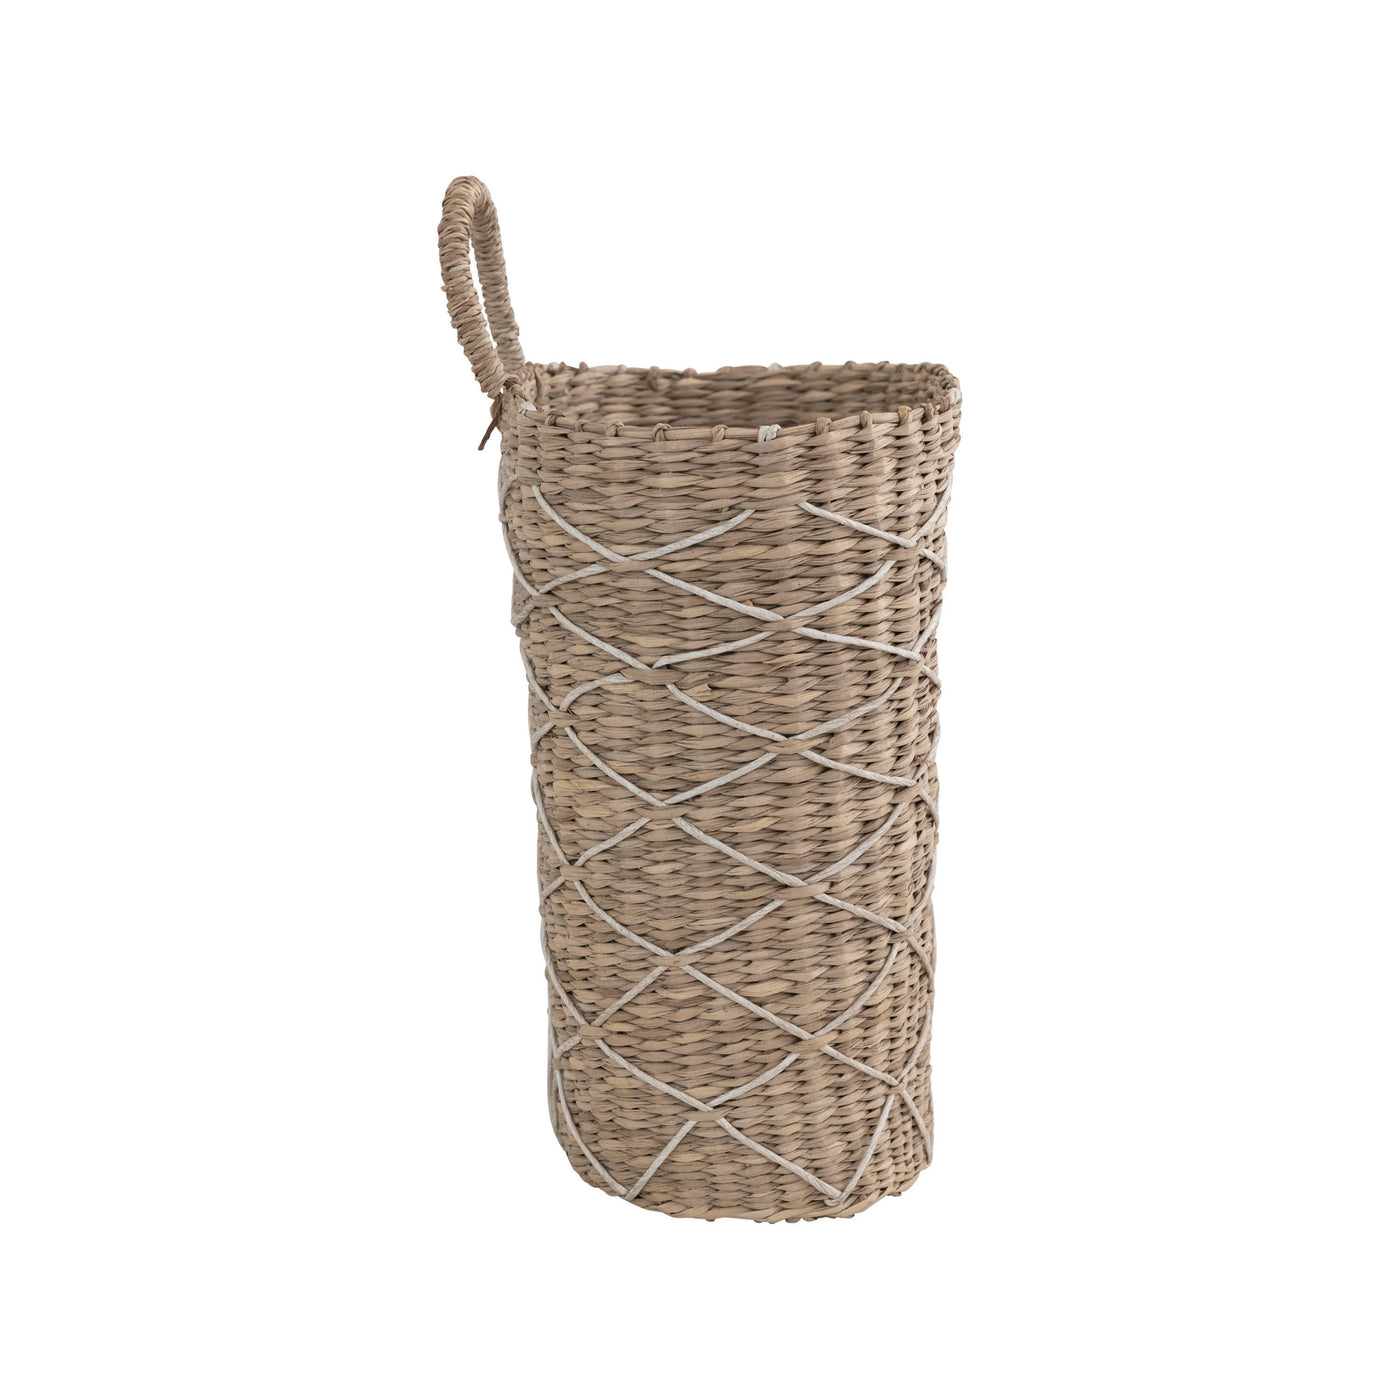 Hand-Woven Seagrass Wall Basket - Madison's Niche 